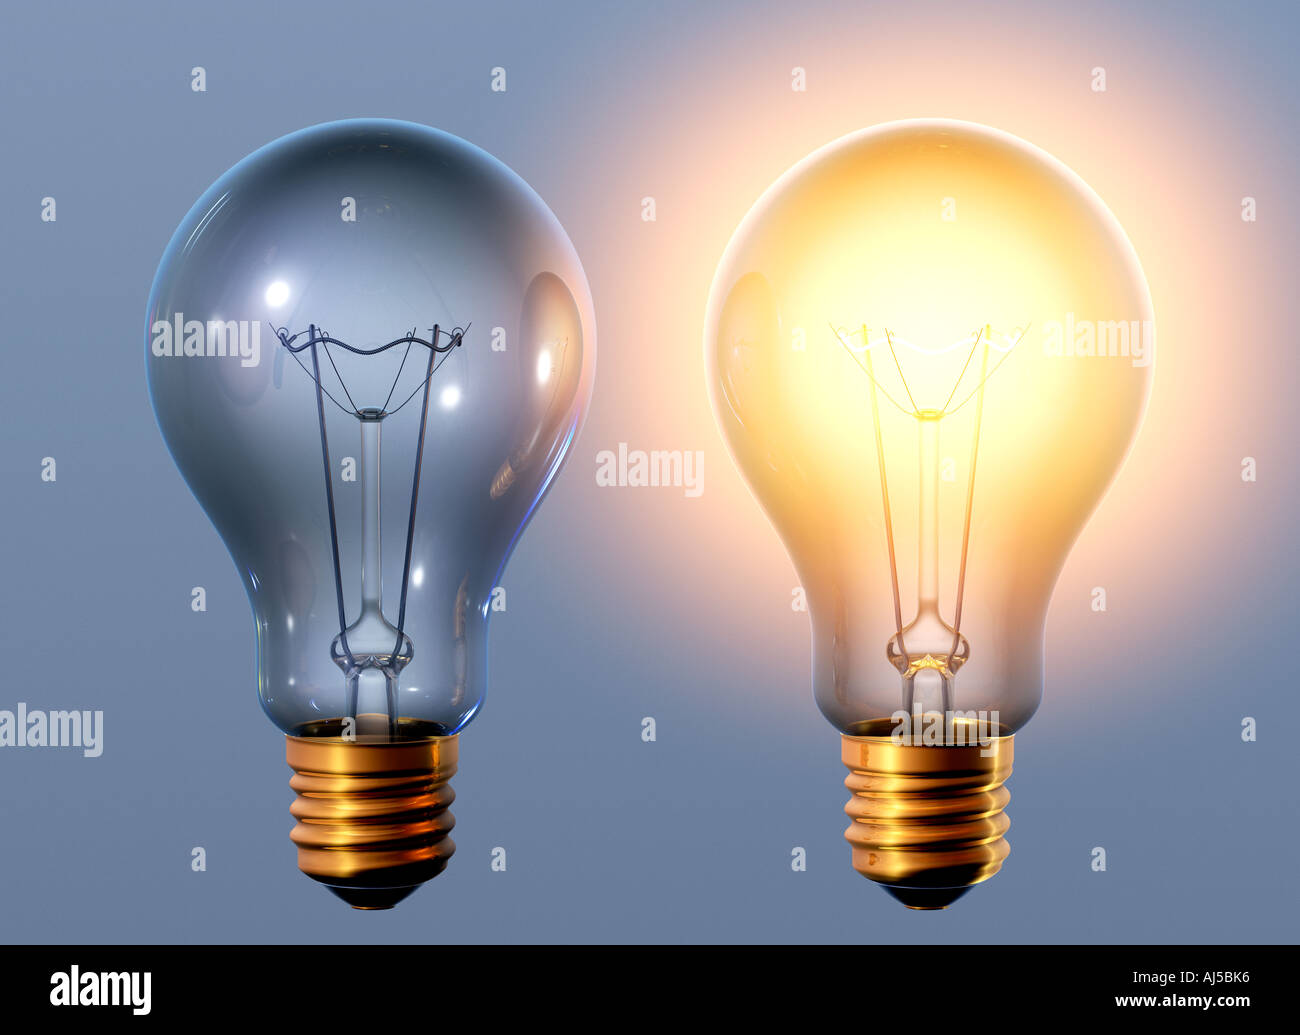 two electric bulbs one bulb with hot filament and the other bulb is not shining Stock Photo